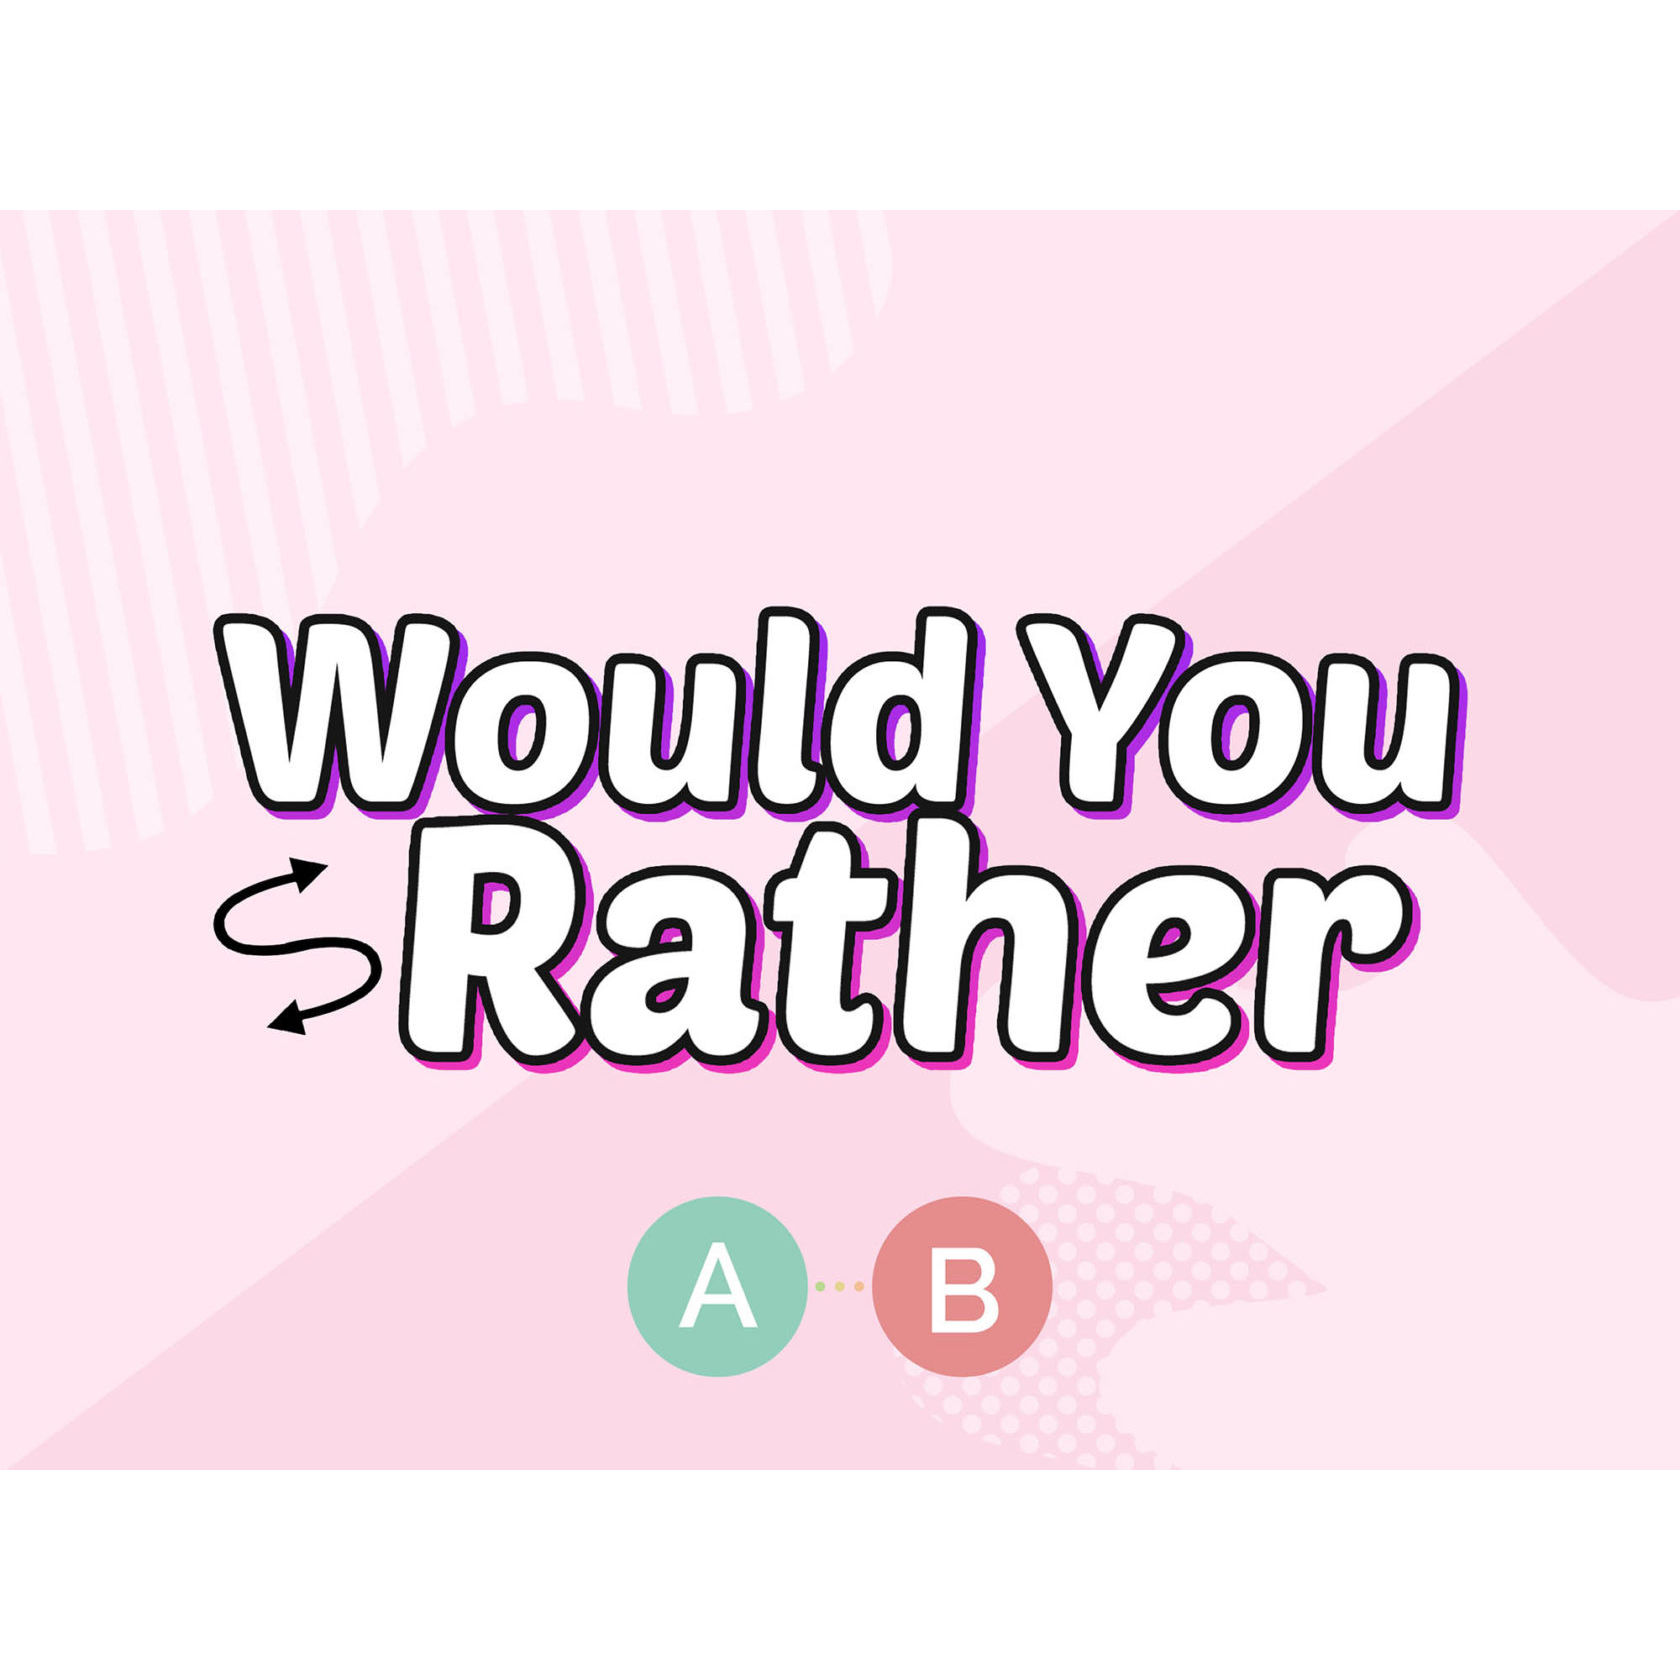 Would You Rather Questions for Friends